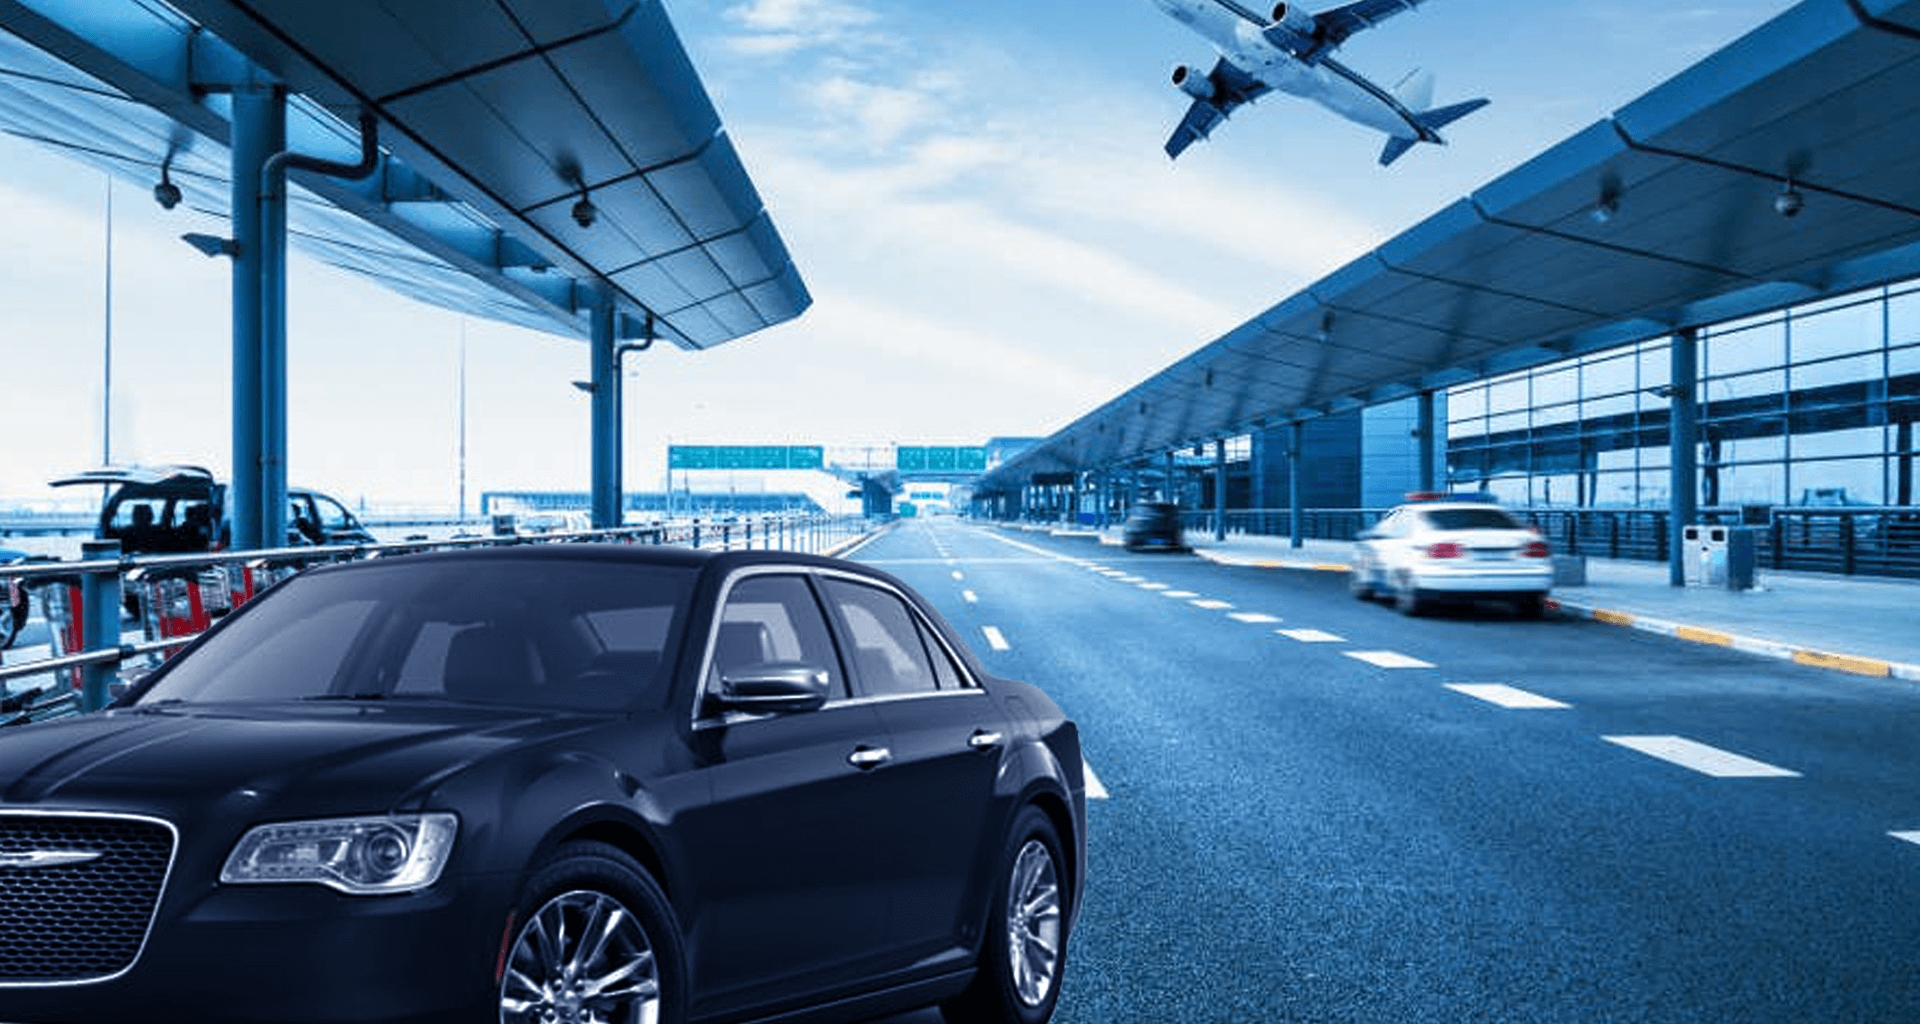 Car Hire Melbourne Airport | Hire Cars For Airport Pickup inside Melbourne Airport Map Car Hire - Australia Map